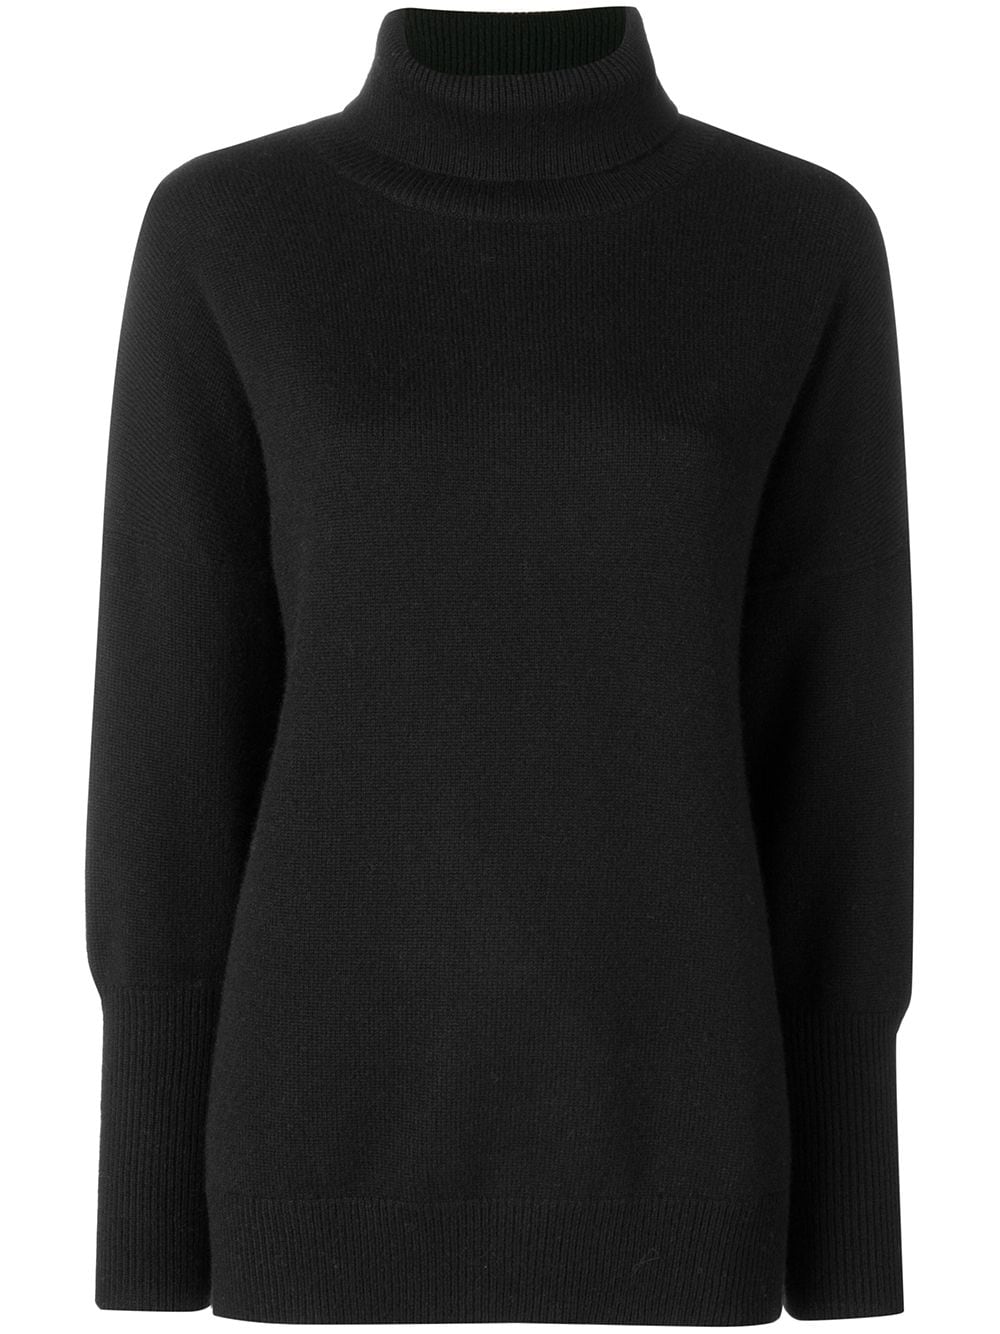 Chinti & Parker relaxed cashmere polo - Black von Chinti & Parker